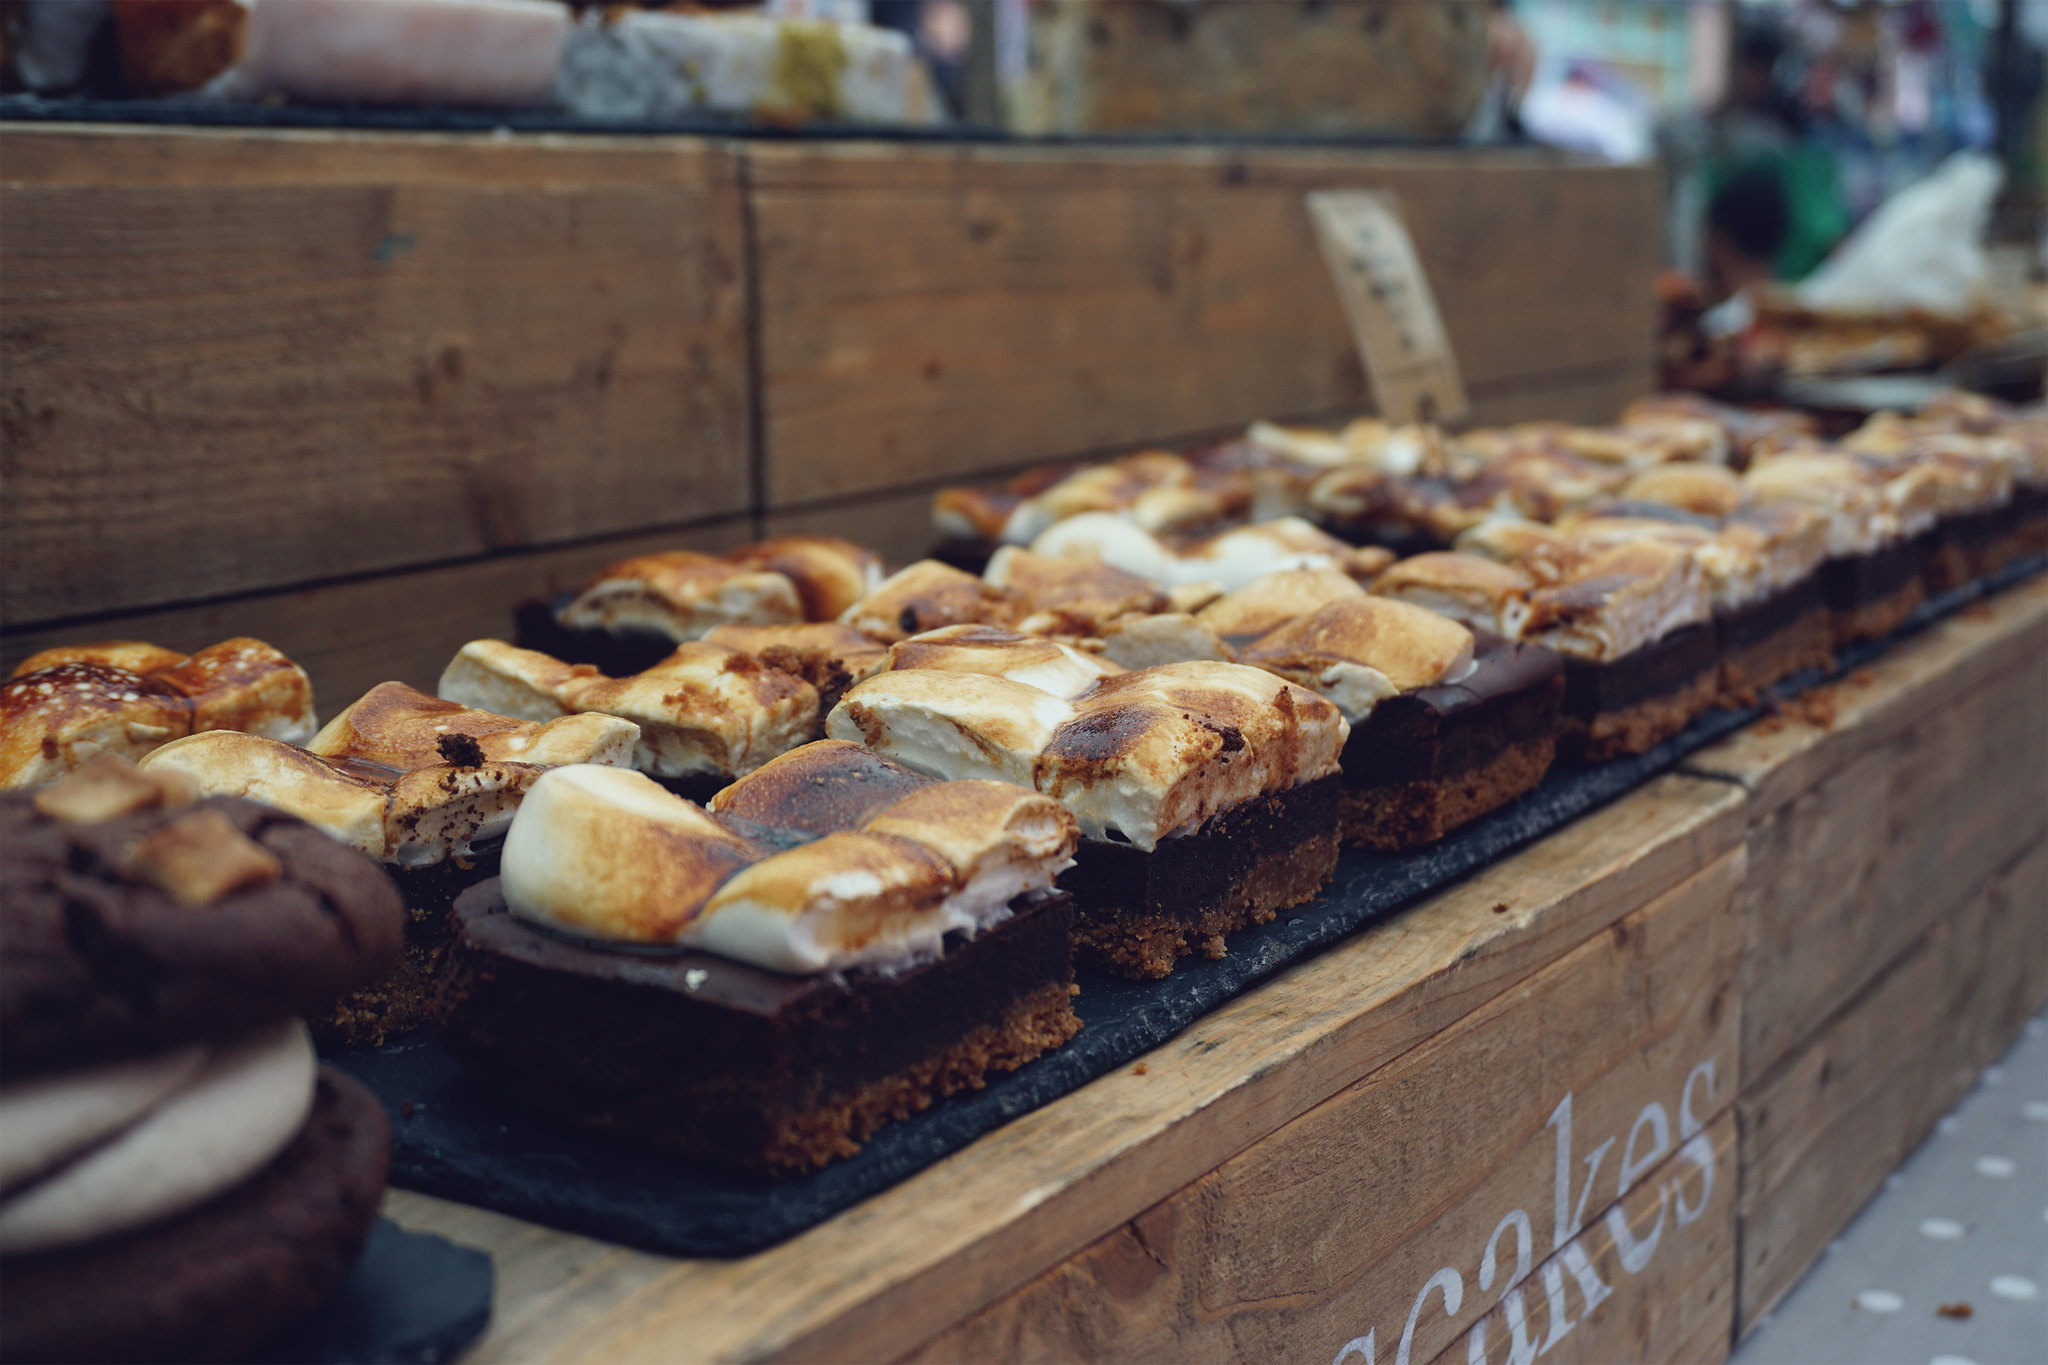 Gluten free smores cheesecake slices from Eatnmess stall | gluten free Broadway Market guide | Hackney, London